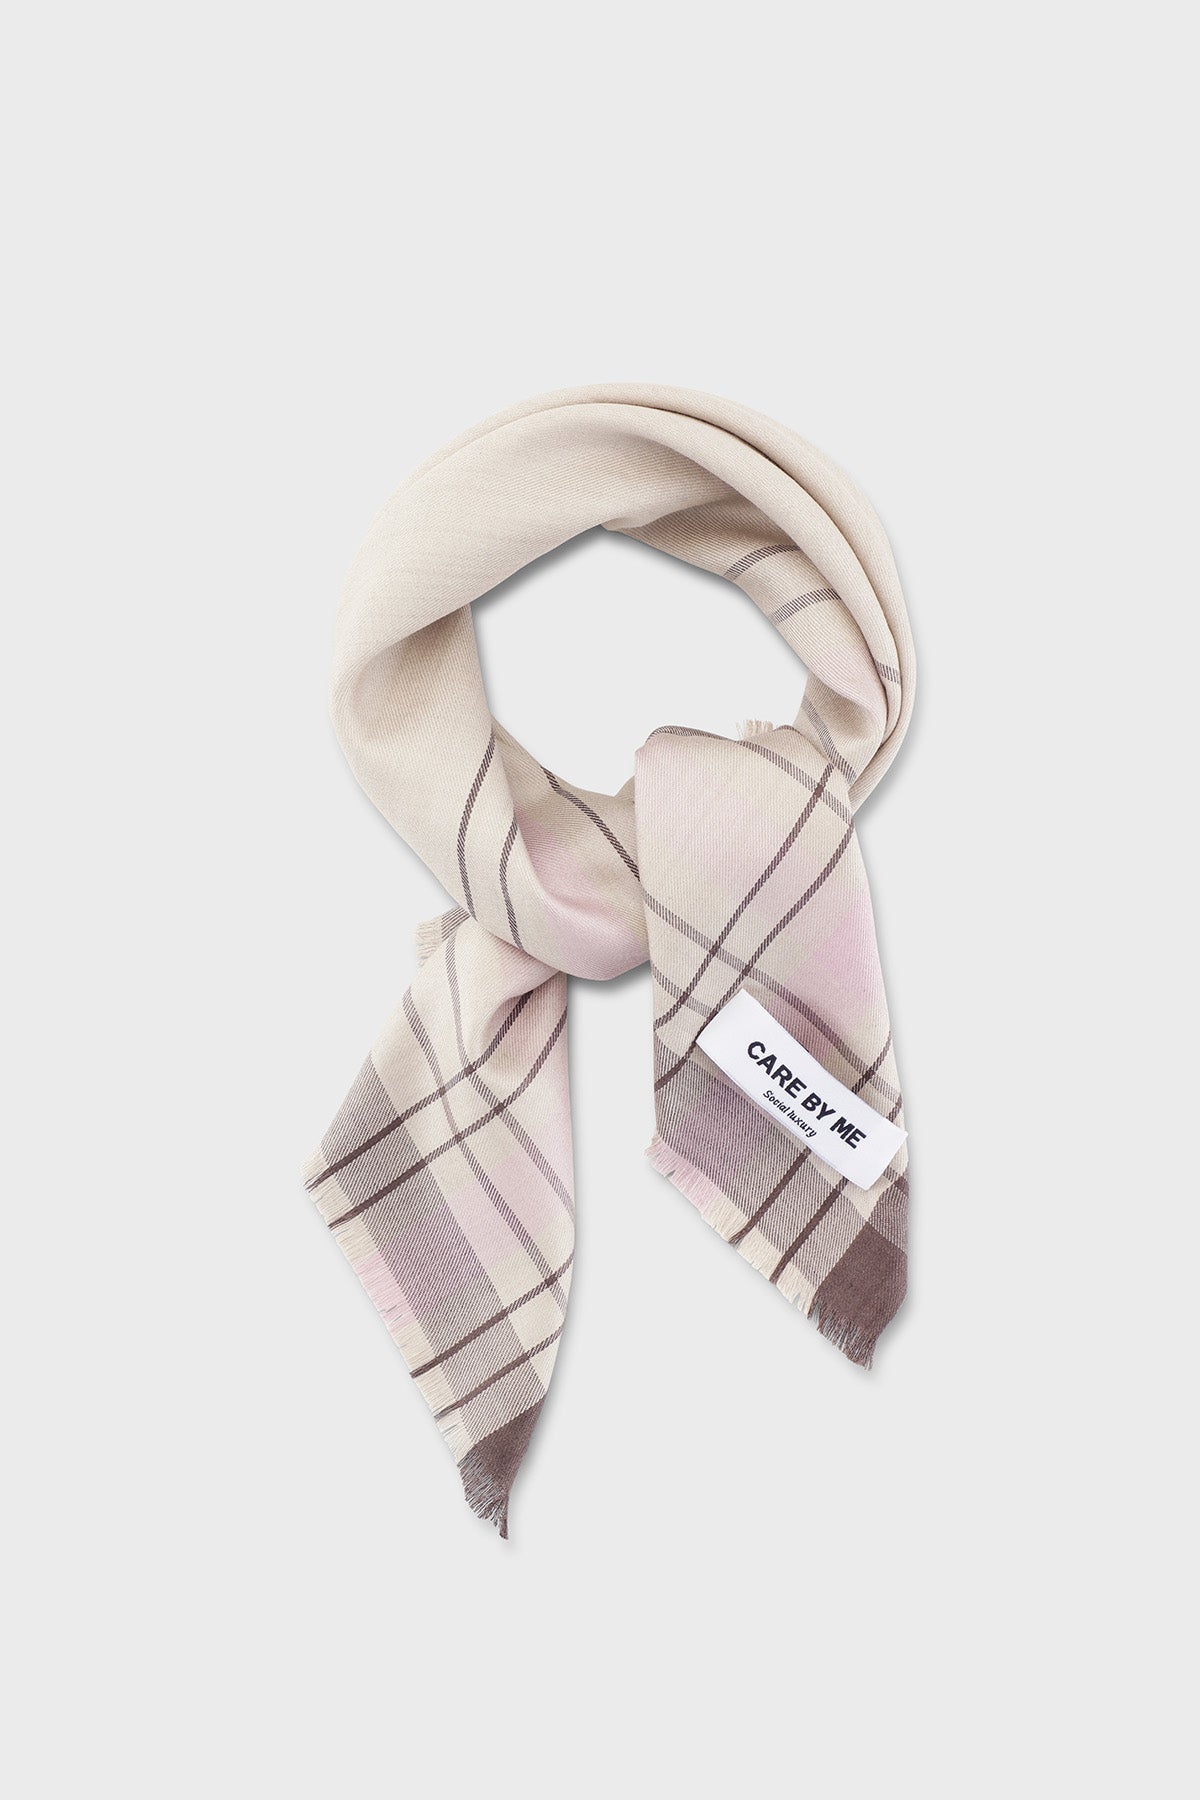 CARE BY ME Palermo Scarf